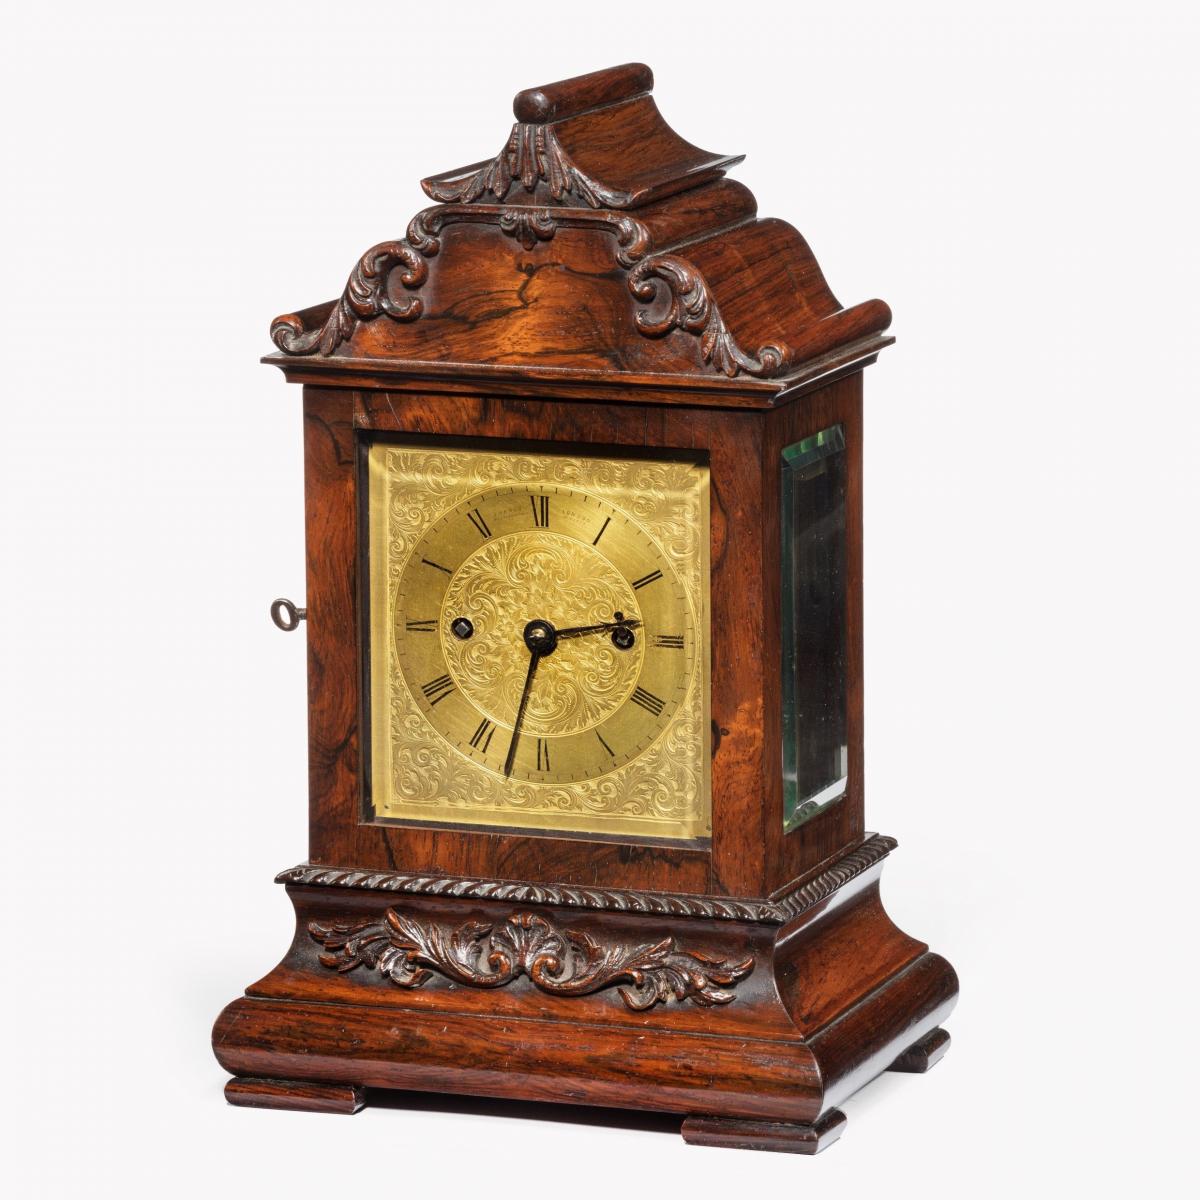 William IV rosewood bracket clock by French, Royal Exchange, London